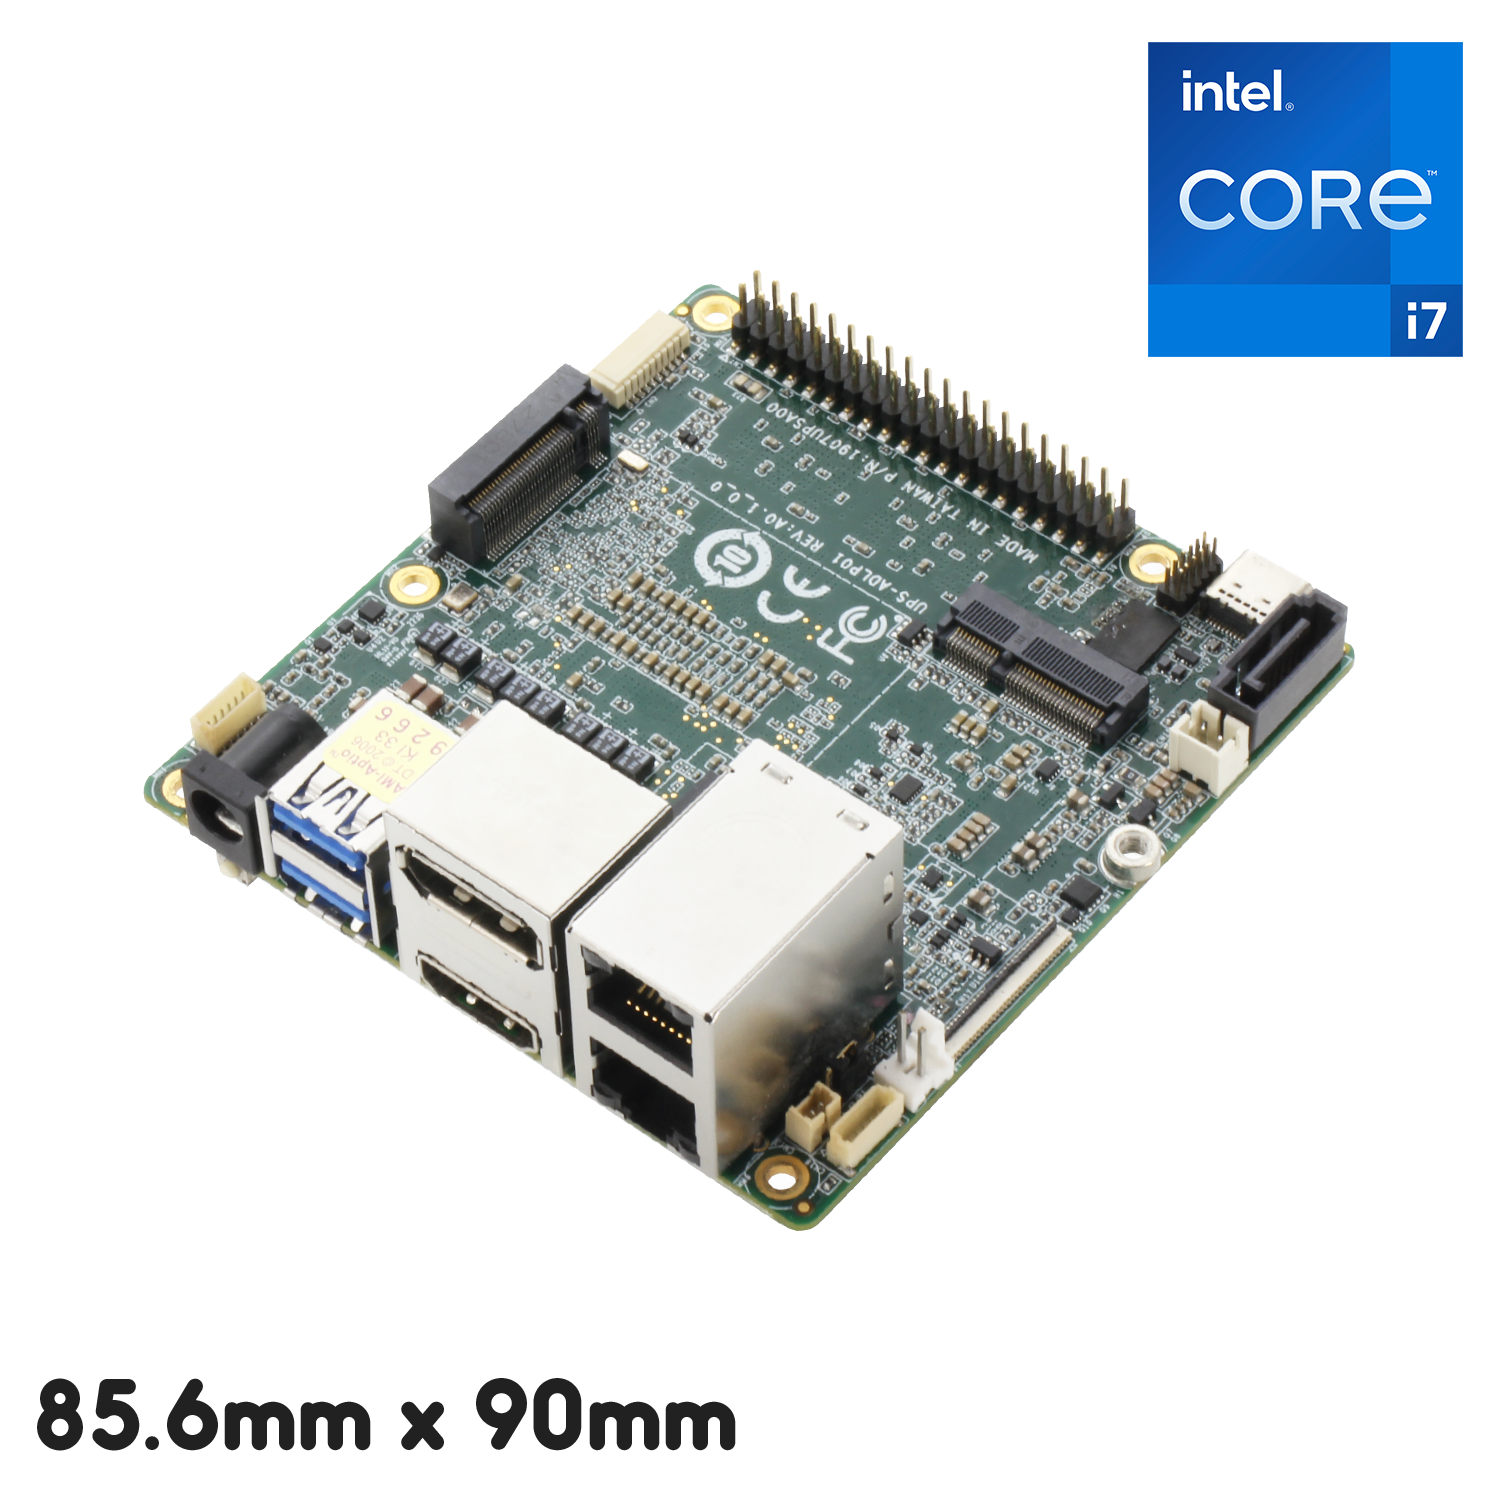 Product photo of UP Squared i12, embedded board, front view